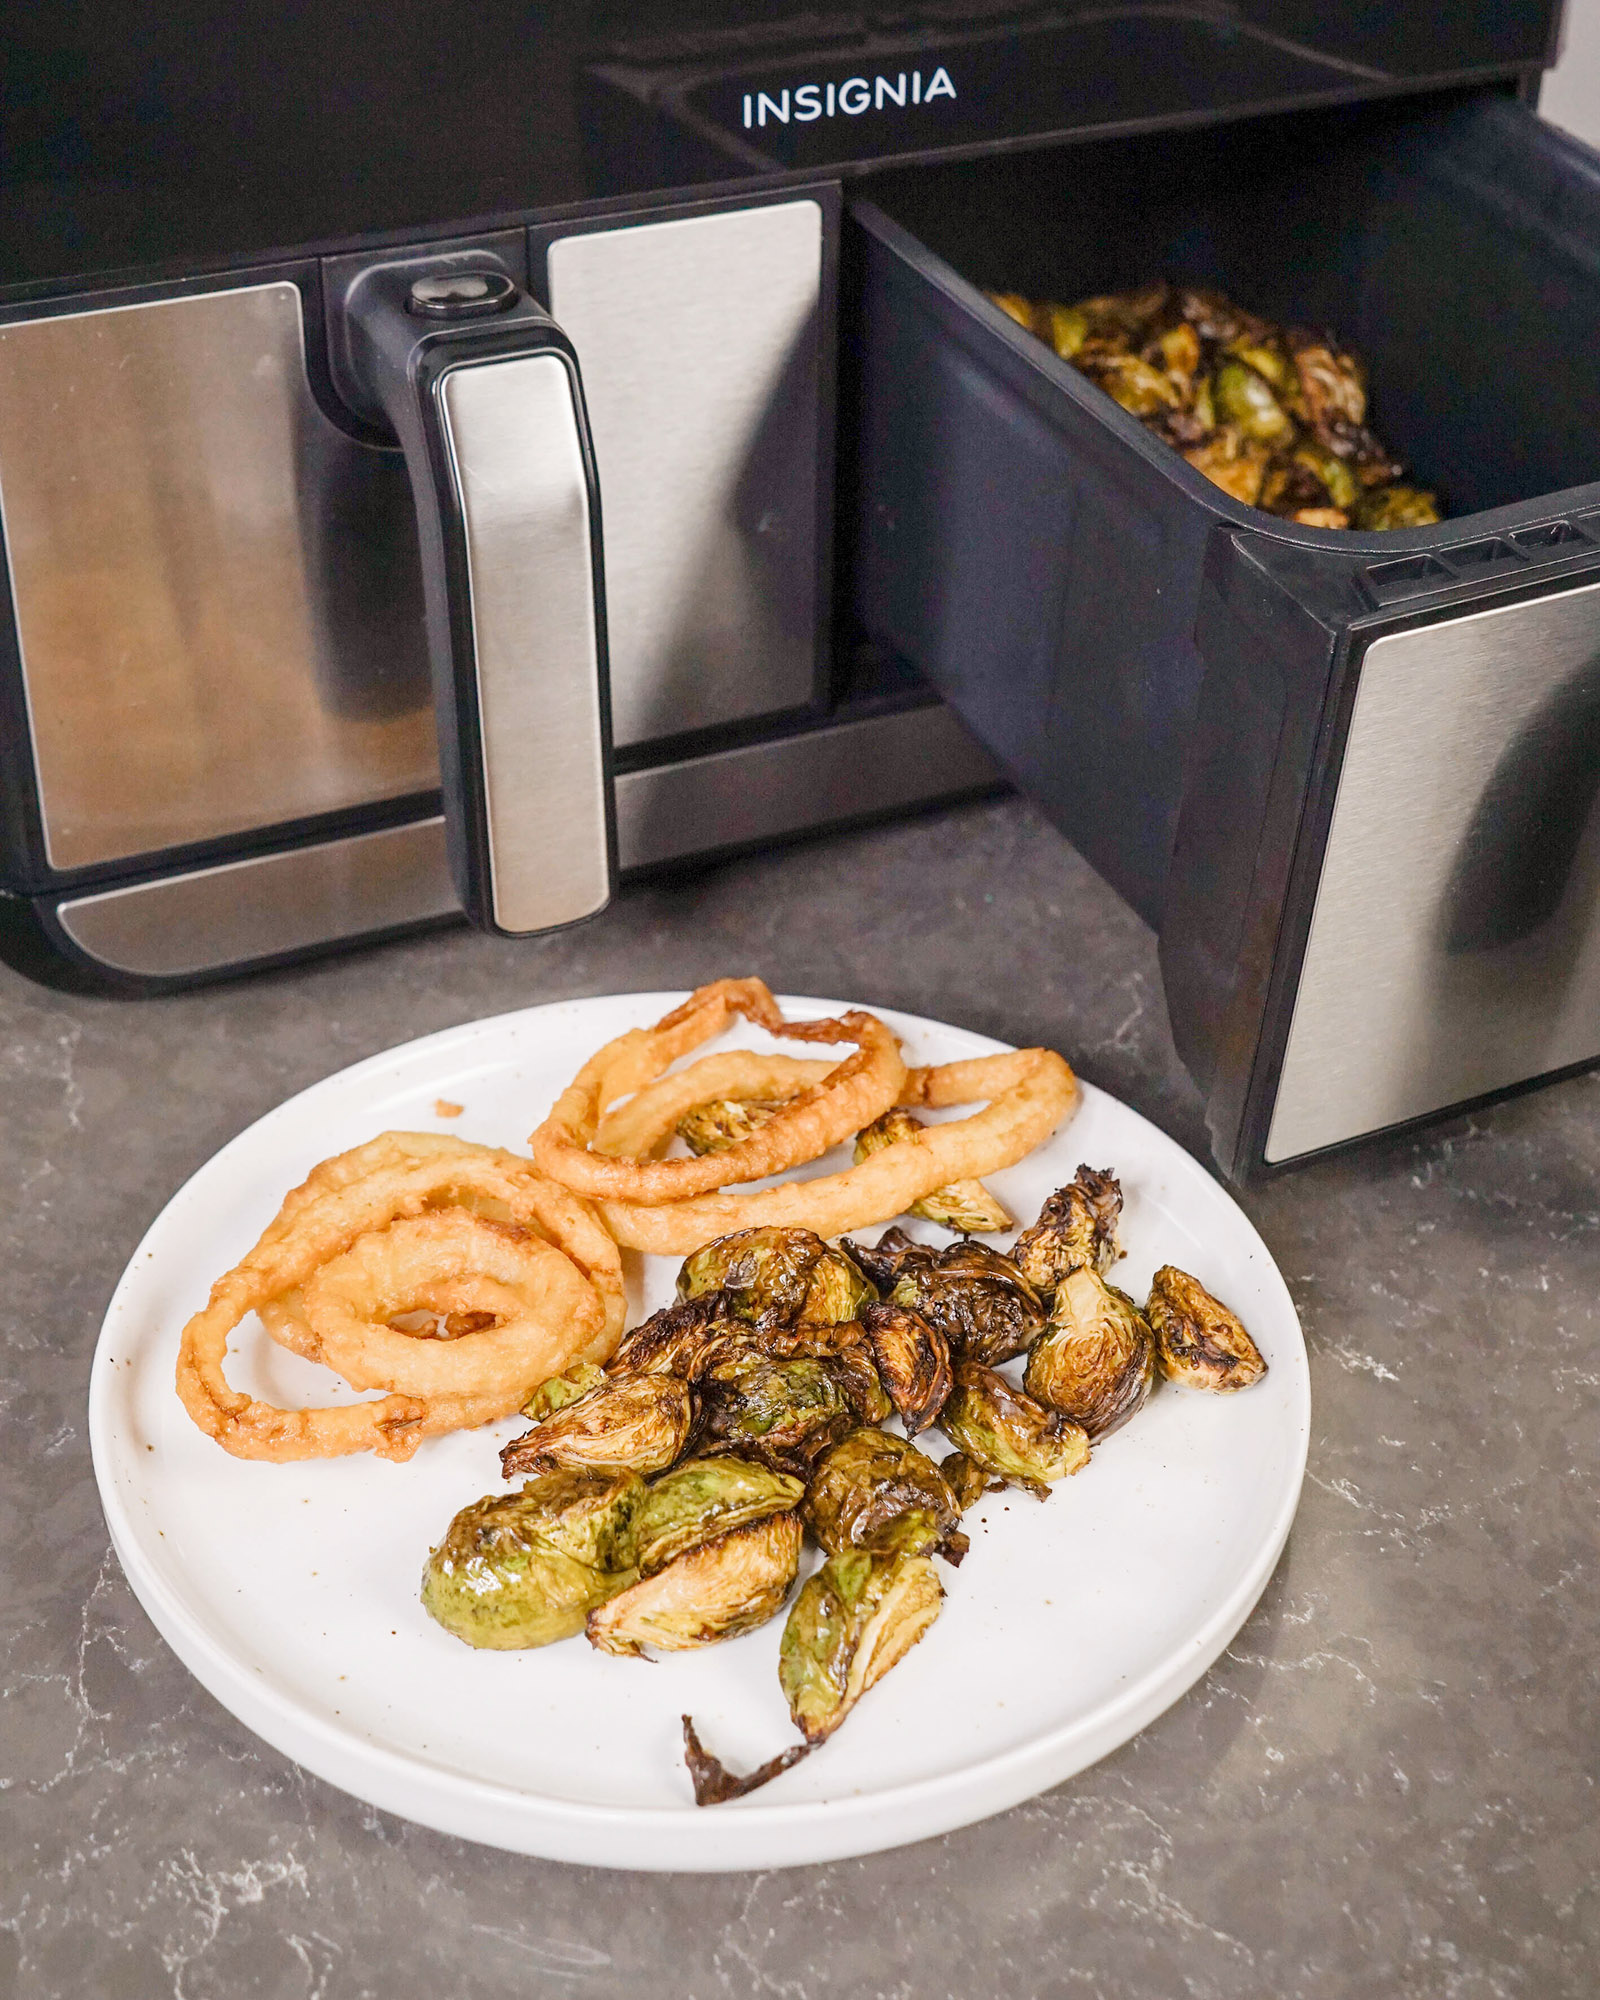 https://blog.bestbuy.ca/wp-content/uploads/2021/12/Insignia-Air-Fryer-with-Dual-Pan-review-18.jpg